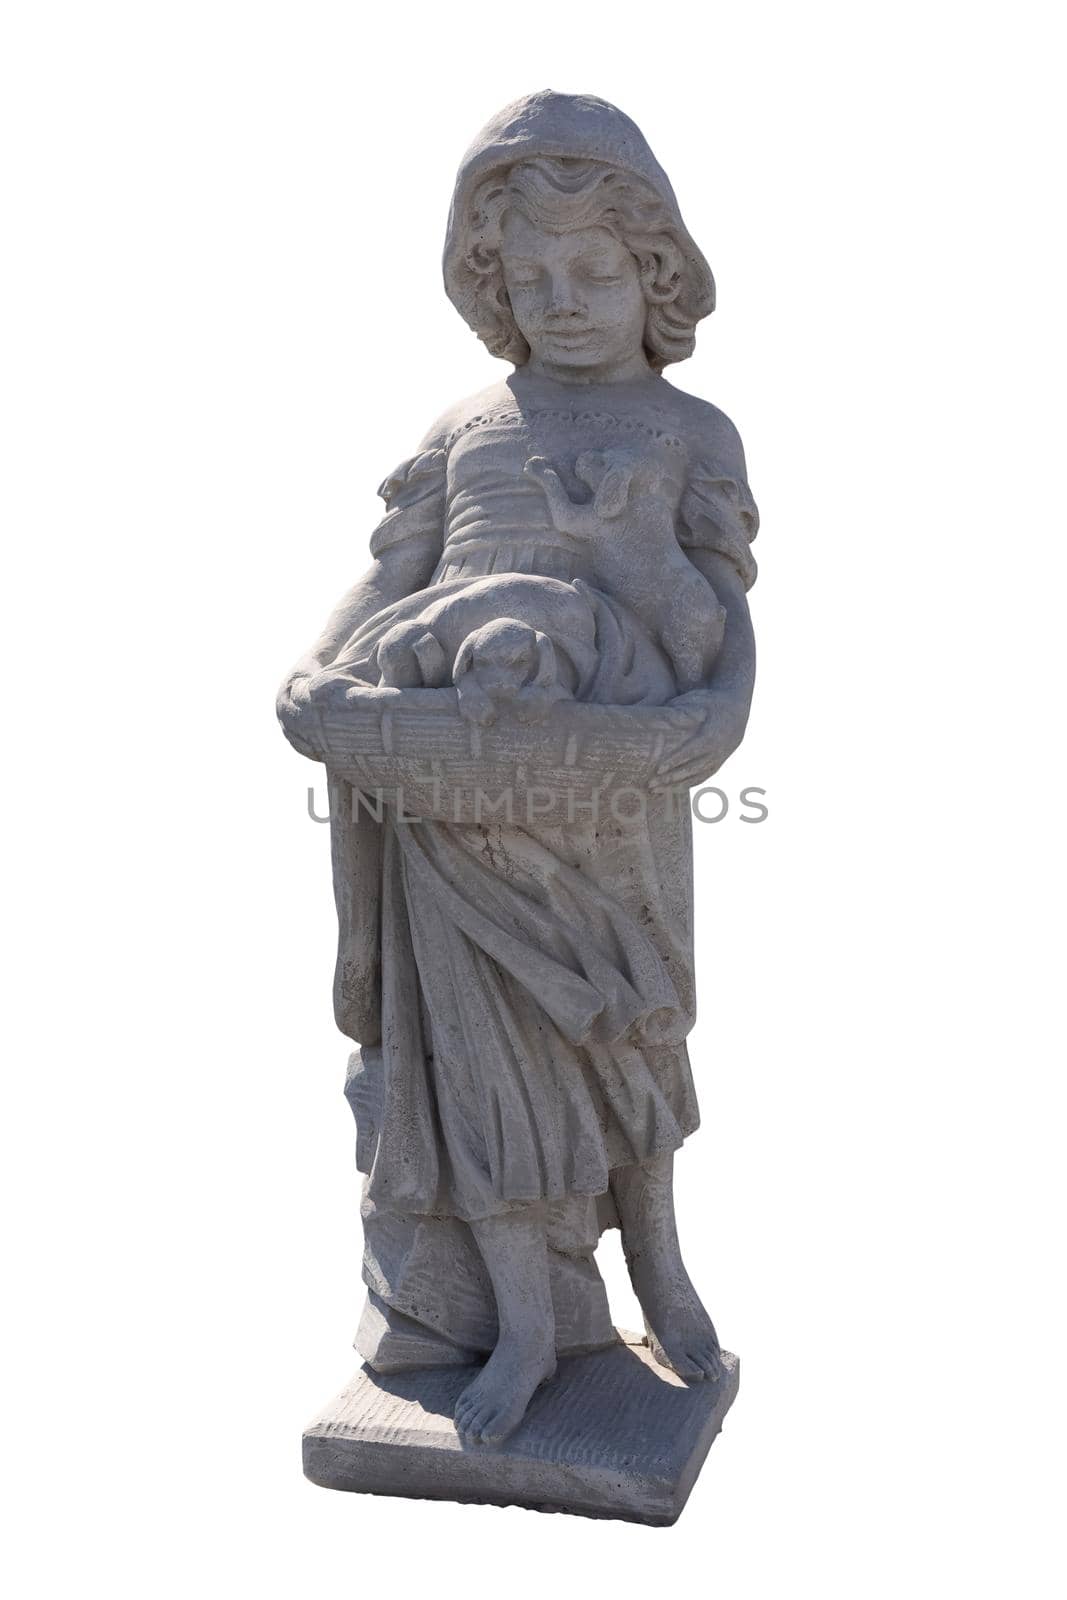 Stone sculpture of girl holding puppies in basket on white background by Wavebreakmedia